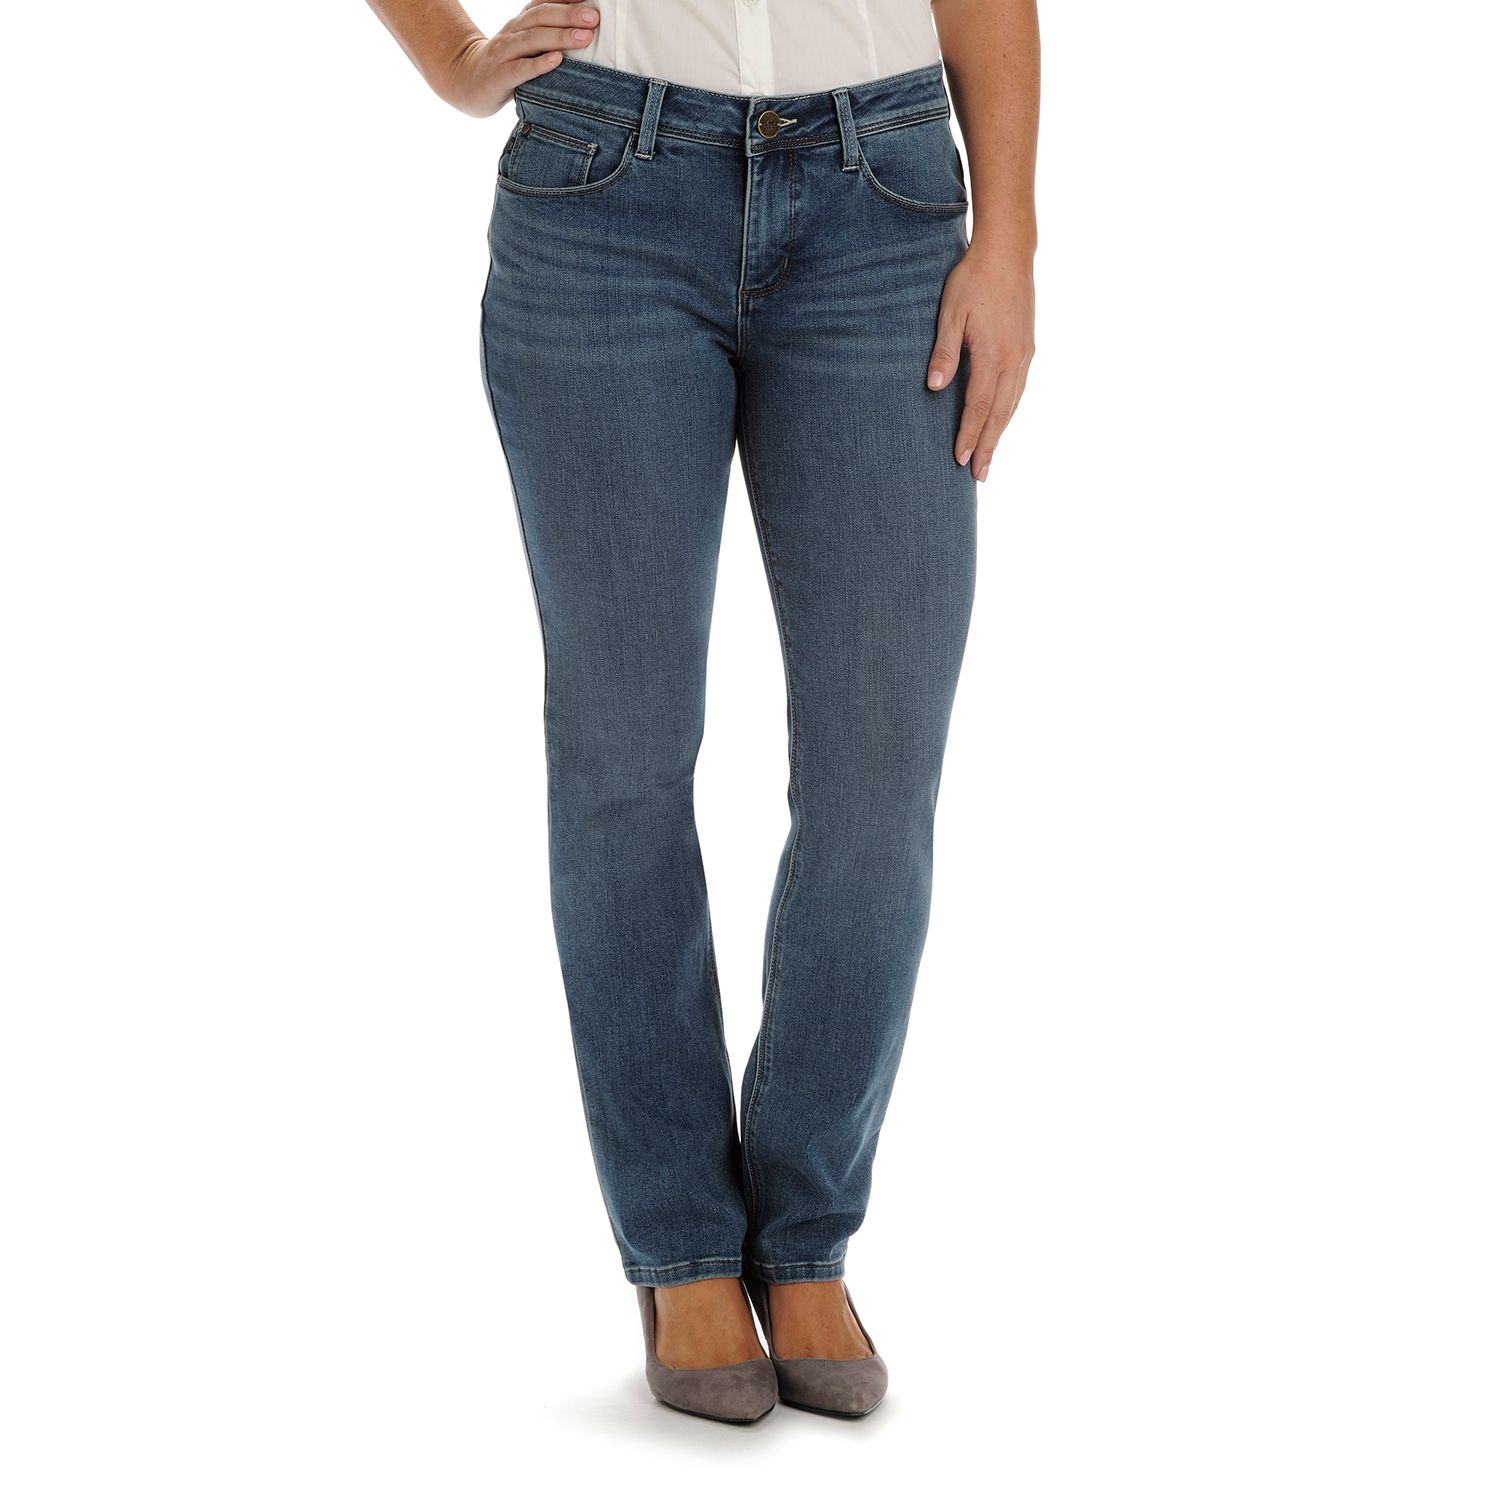 kohls mens lee jeans relaxed fit